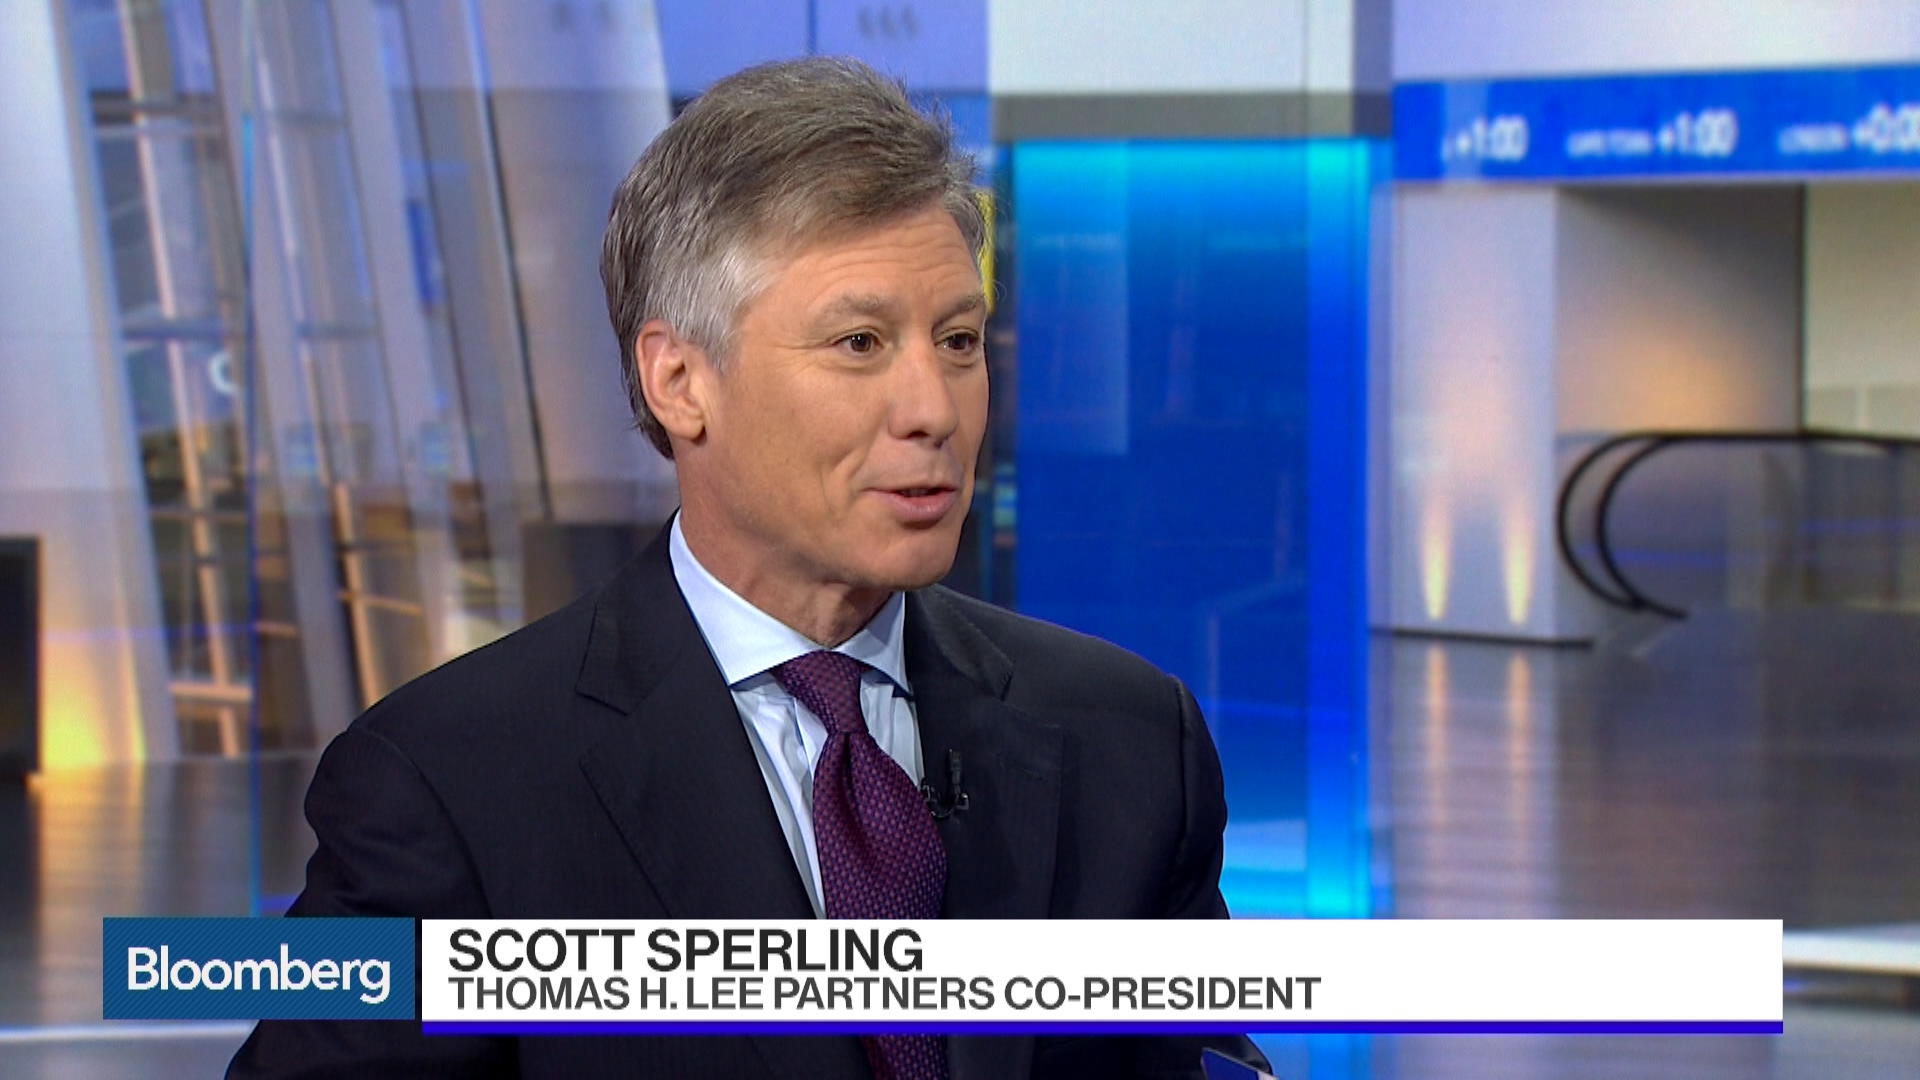 Watch Thomas H. Lee's Sperling on Private Equity Investing - Bloomberg